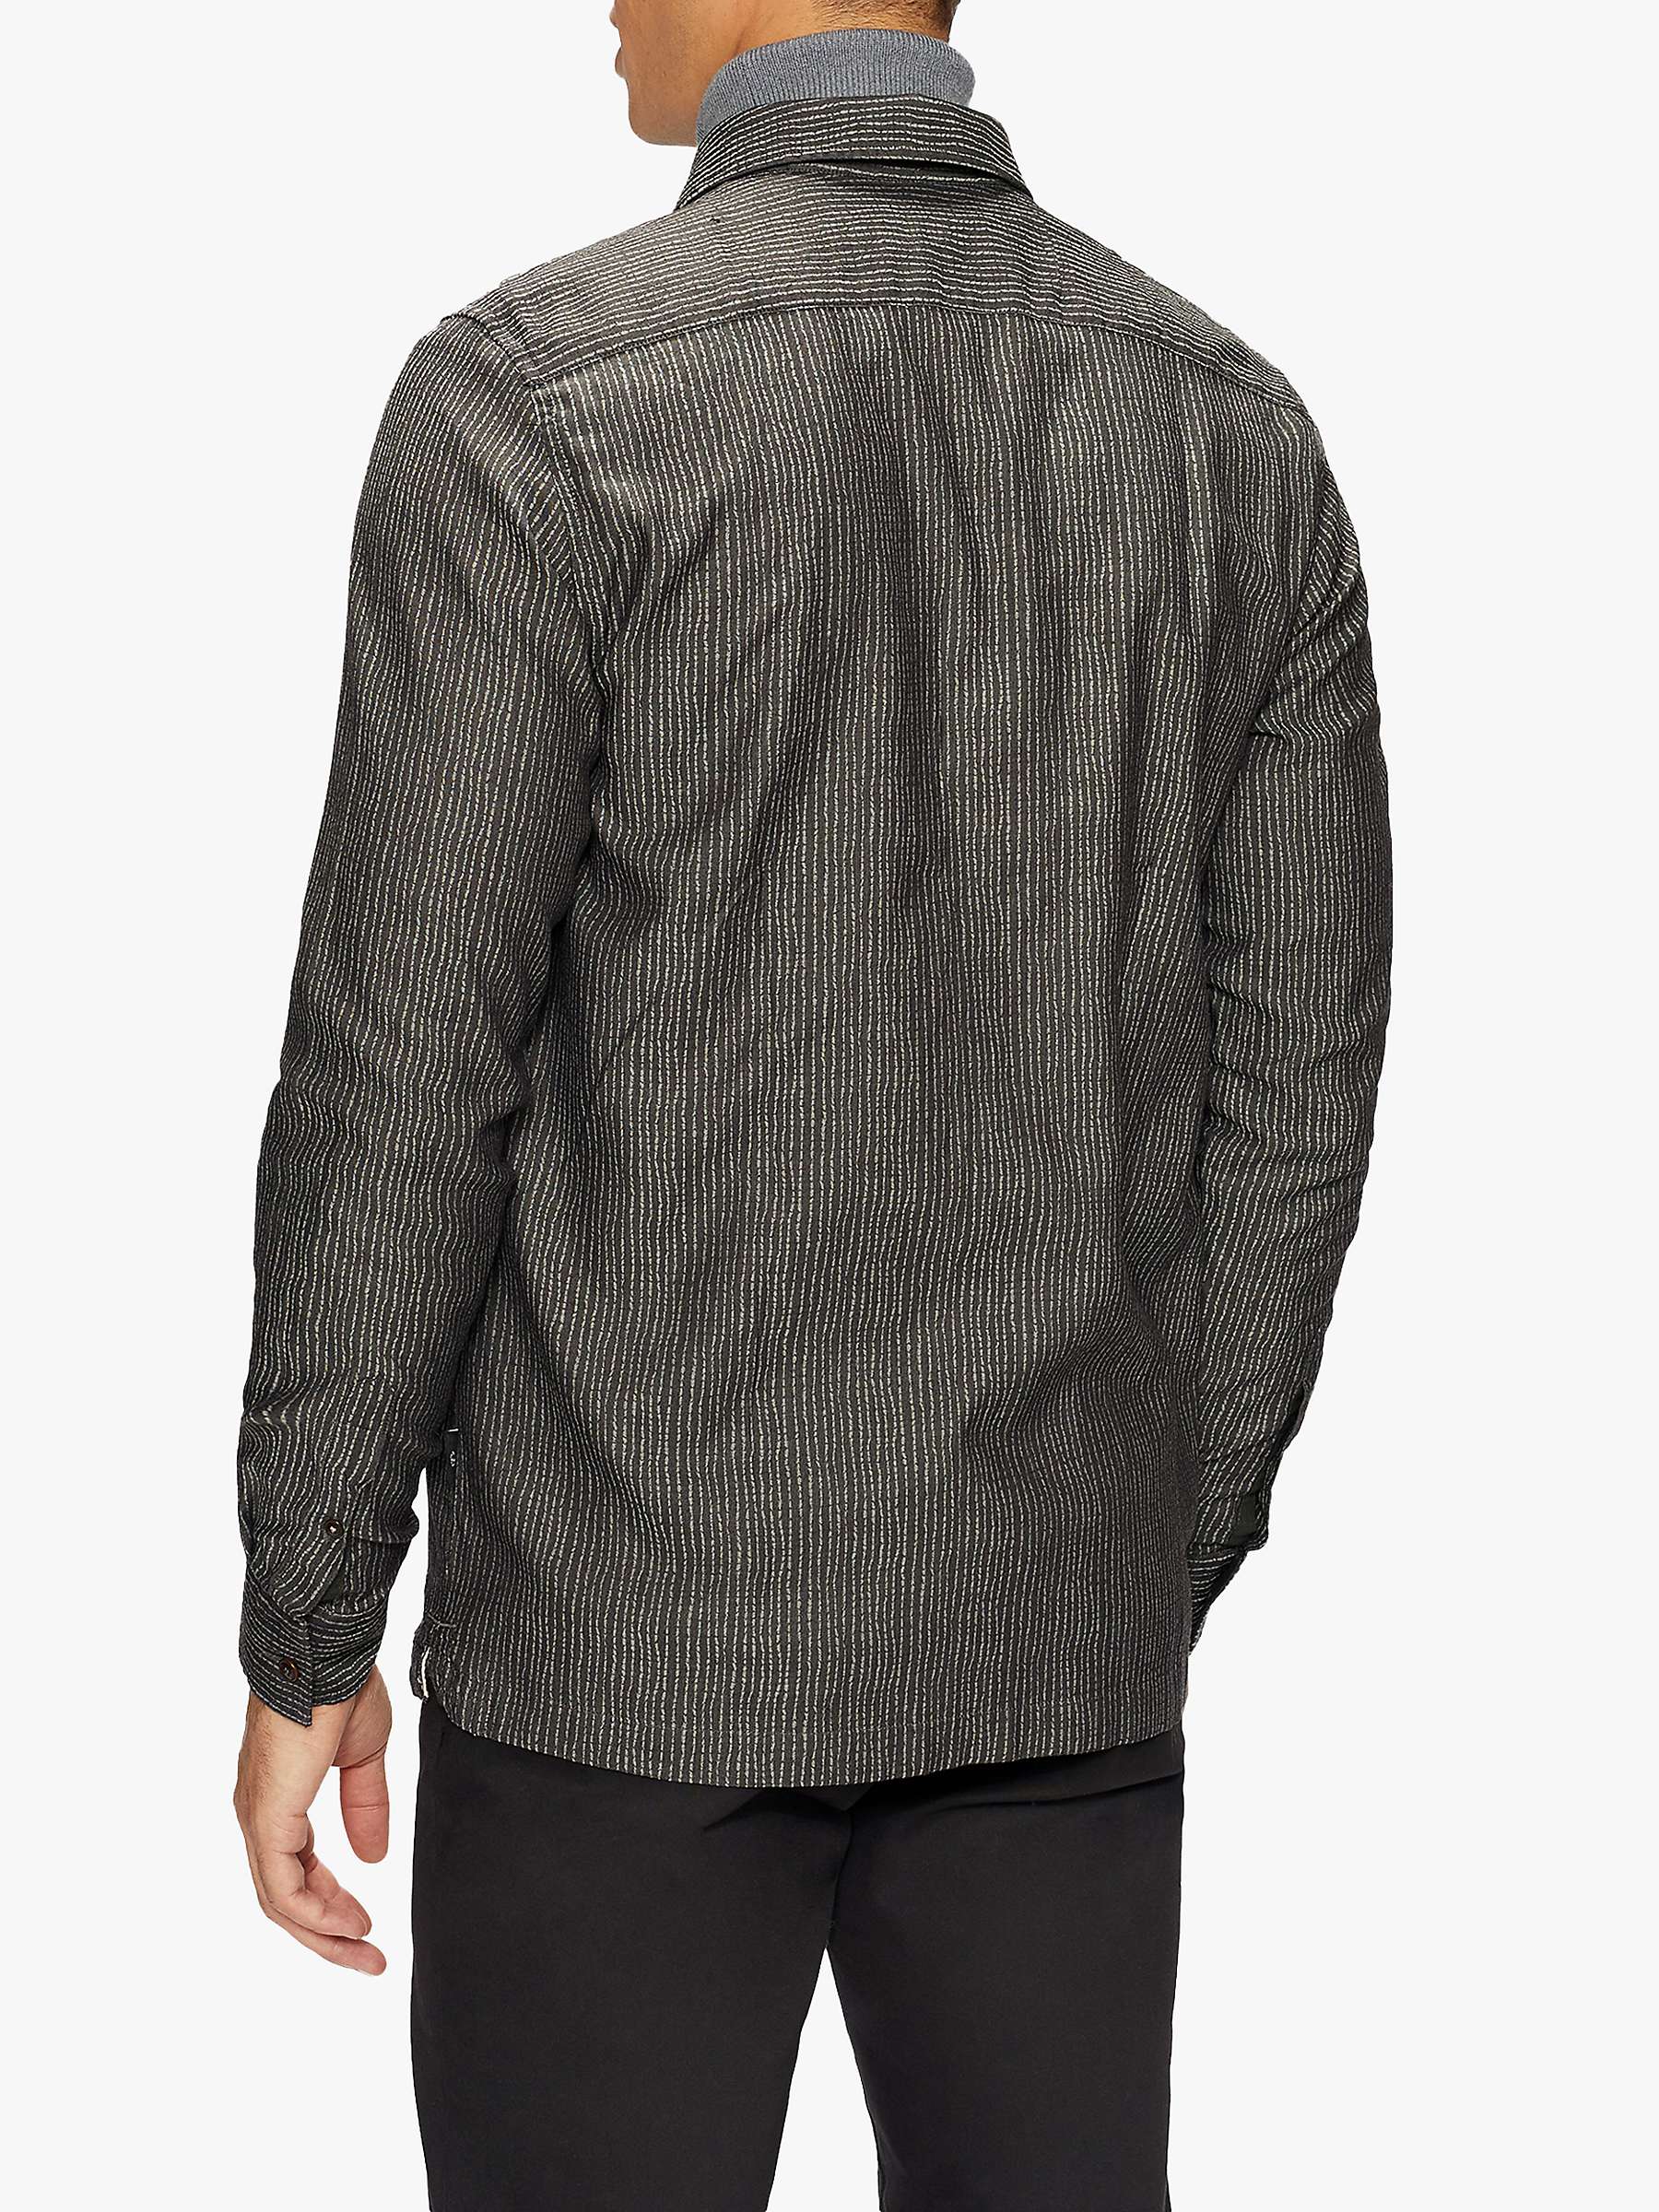 Buy Ted Baker Clasrom Abstract Stripe Shirt, Black Online at johnlewis.com